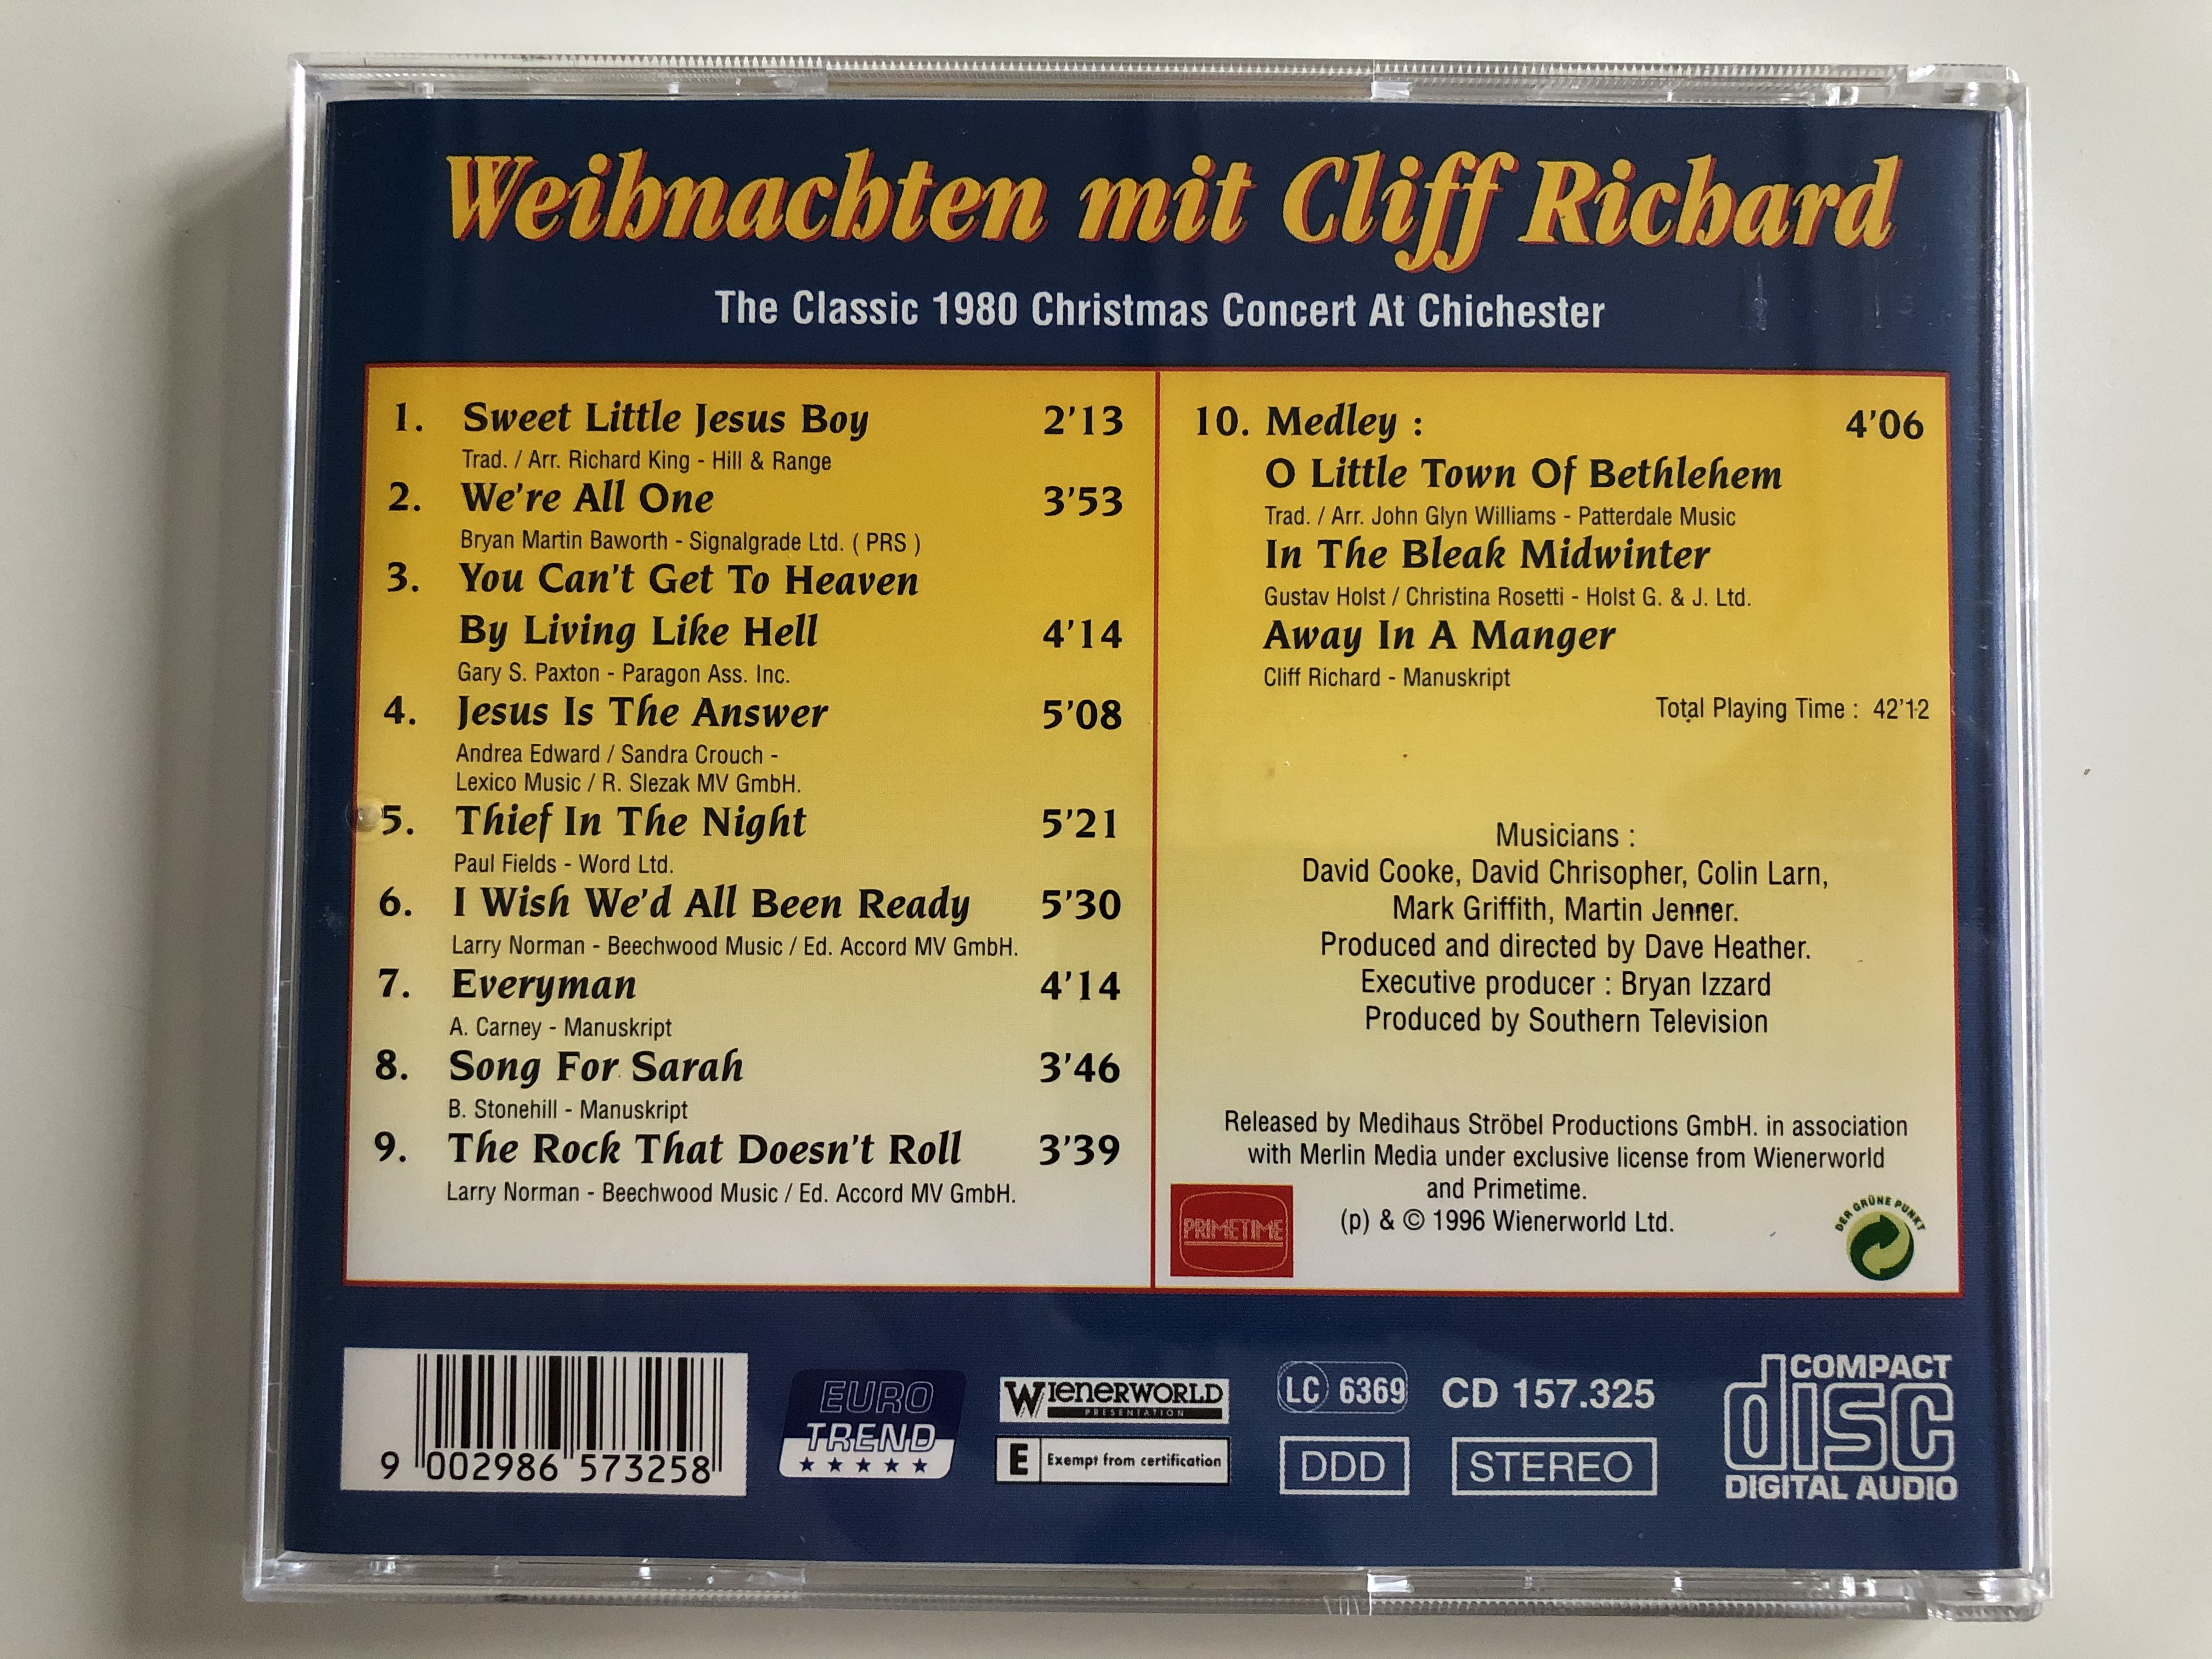 weihnachten-mit-cliff-richard-sweet-little-jesus-boy-o-little-town-of-bethlehem-thief-in-the-night-we-re-all-one-u.v.a.-eurotrend-audio-cd-stereo-cd-157-2-.jpg